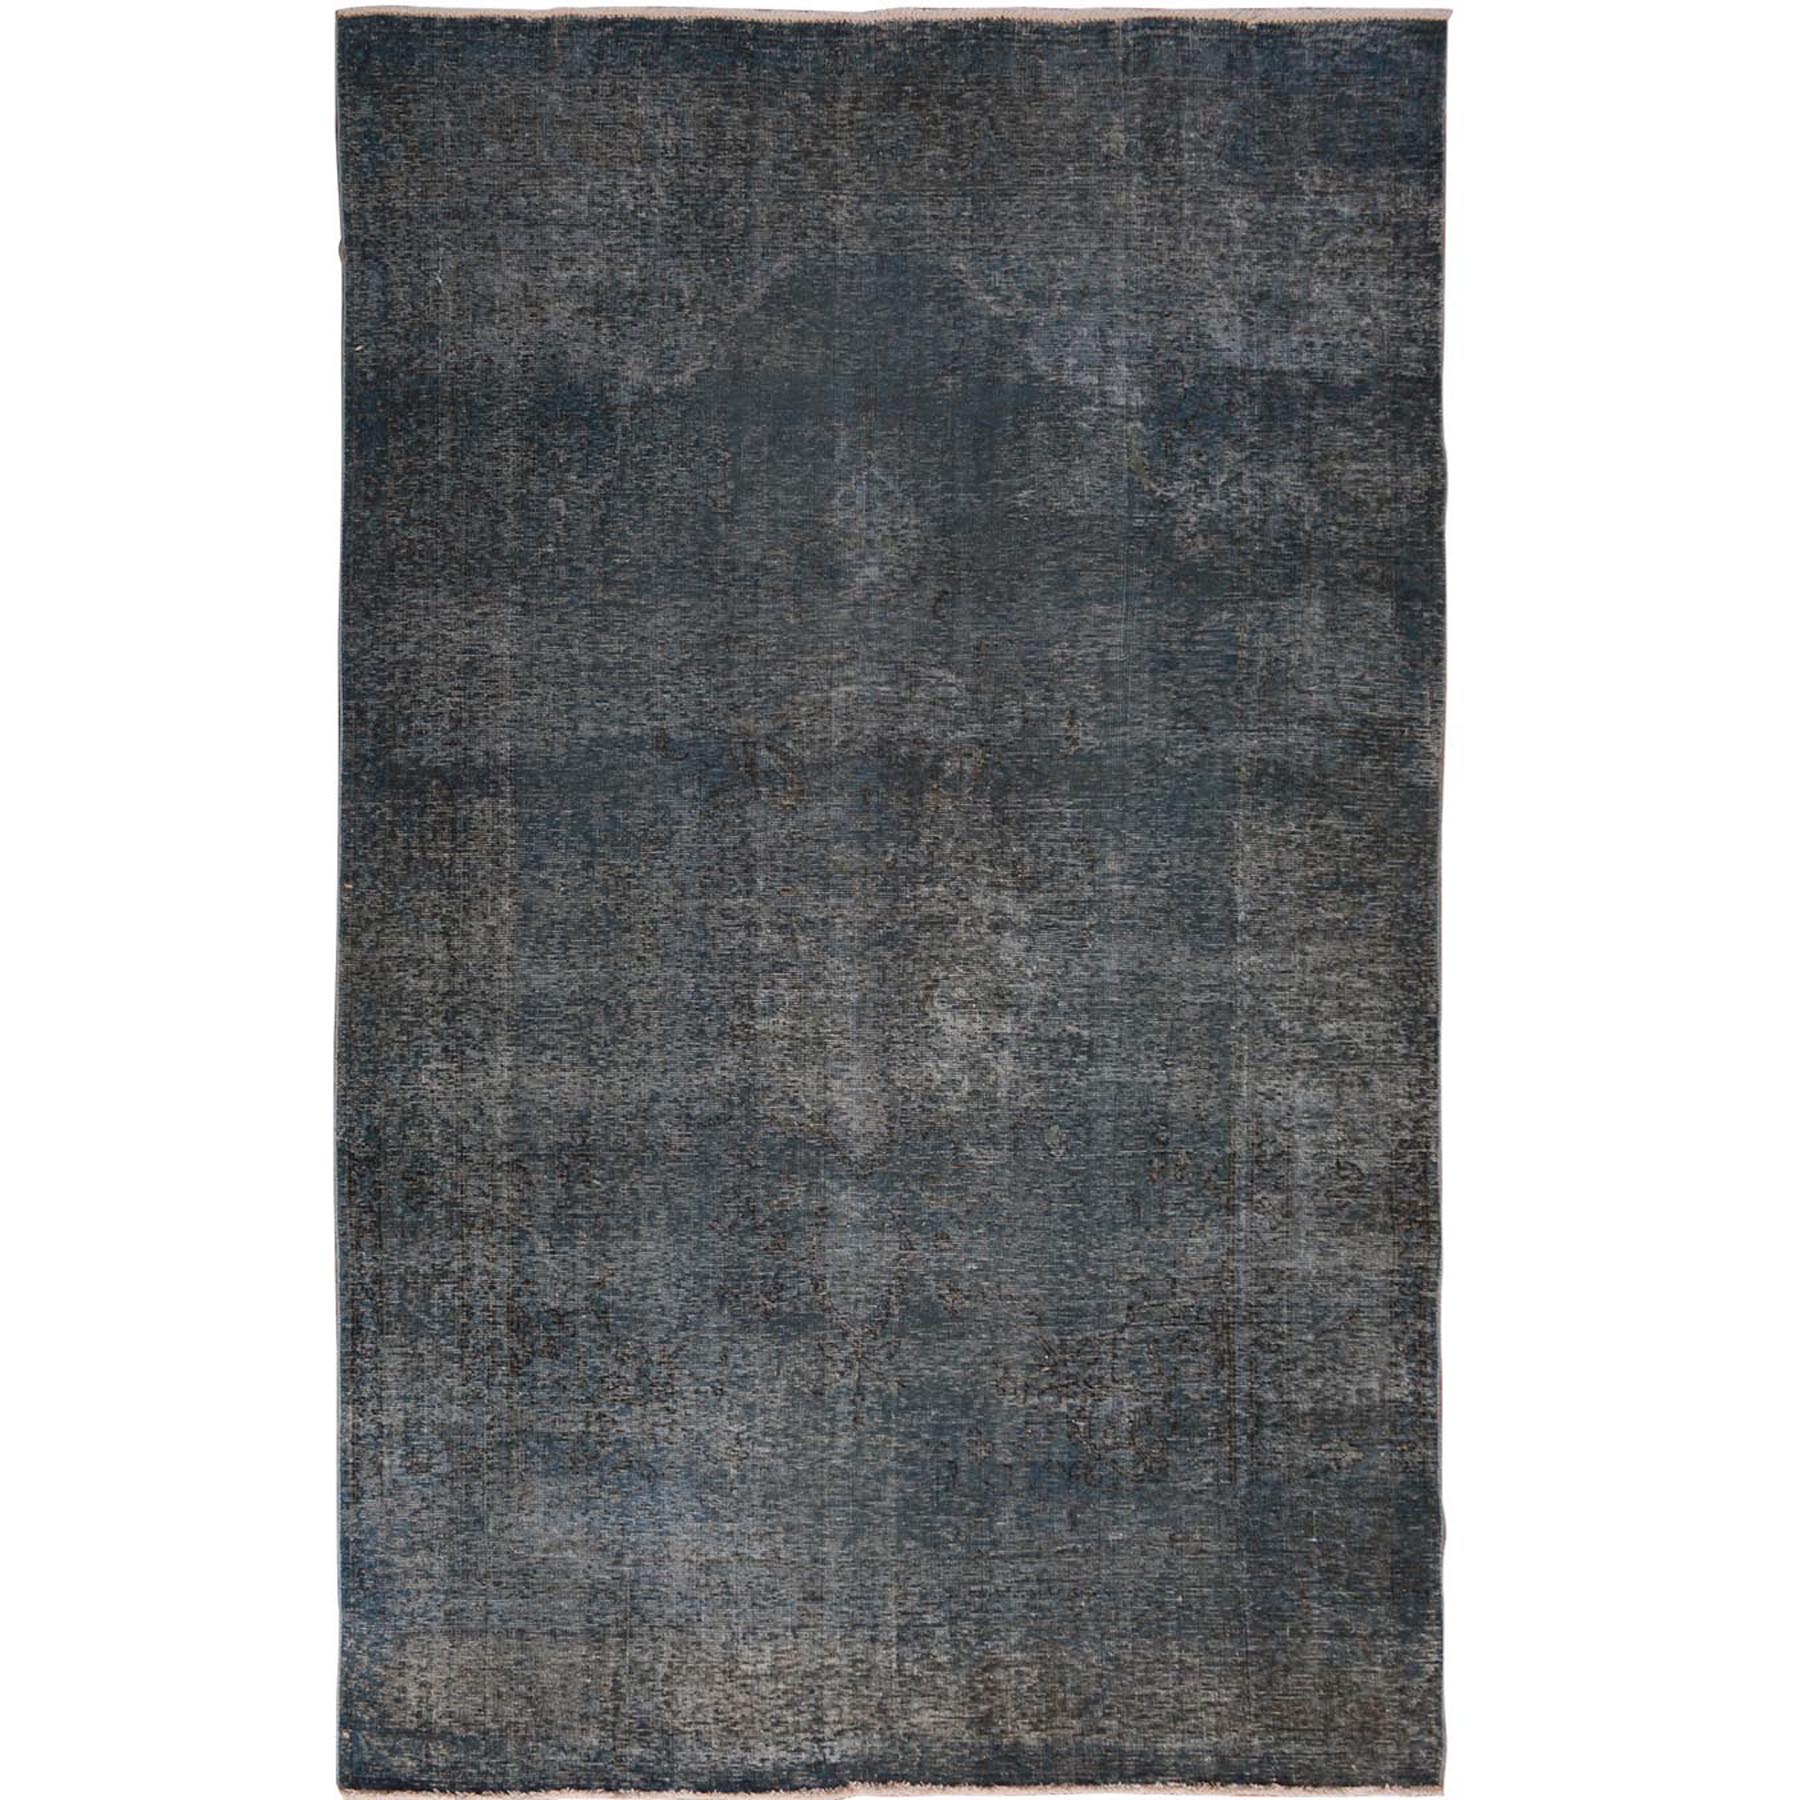 Traditional Wool Hand-Knotted Area Rug 5'9